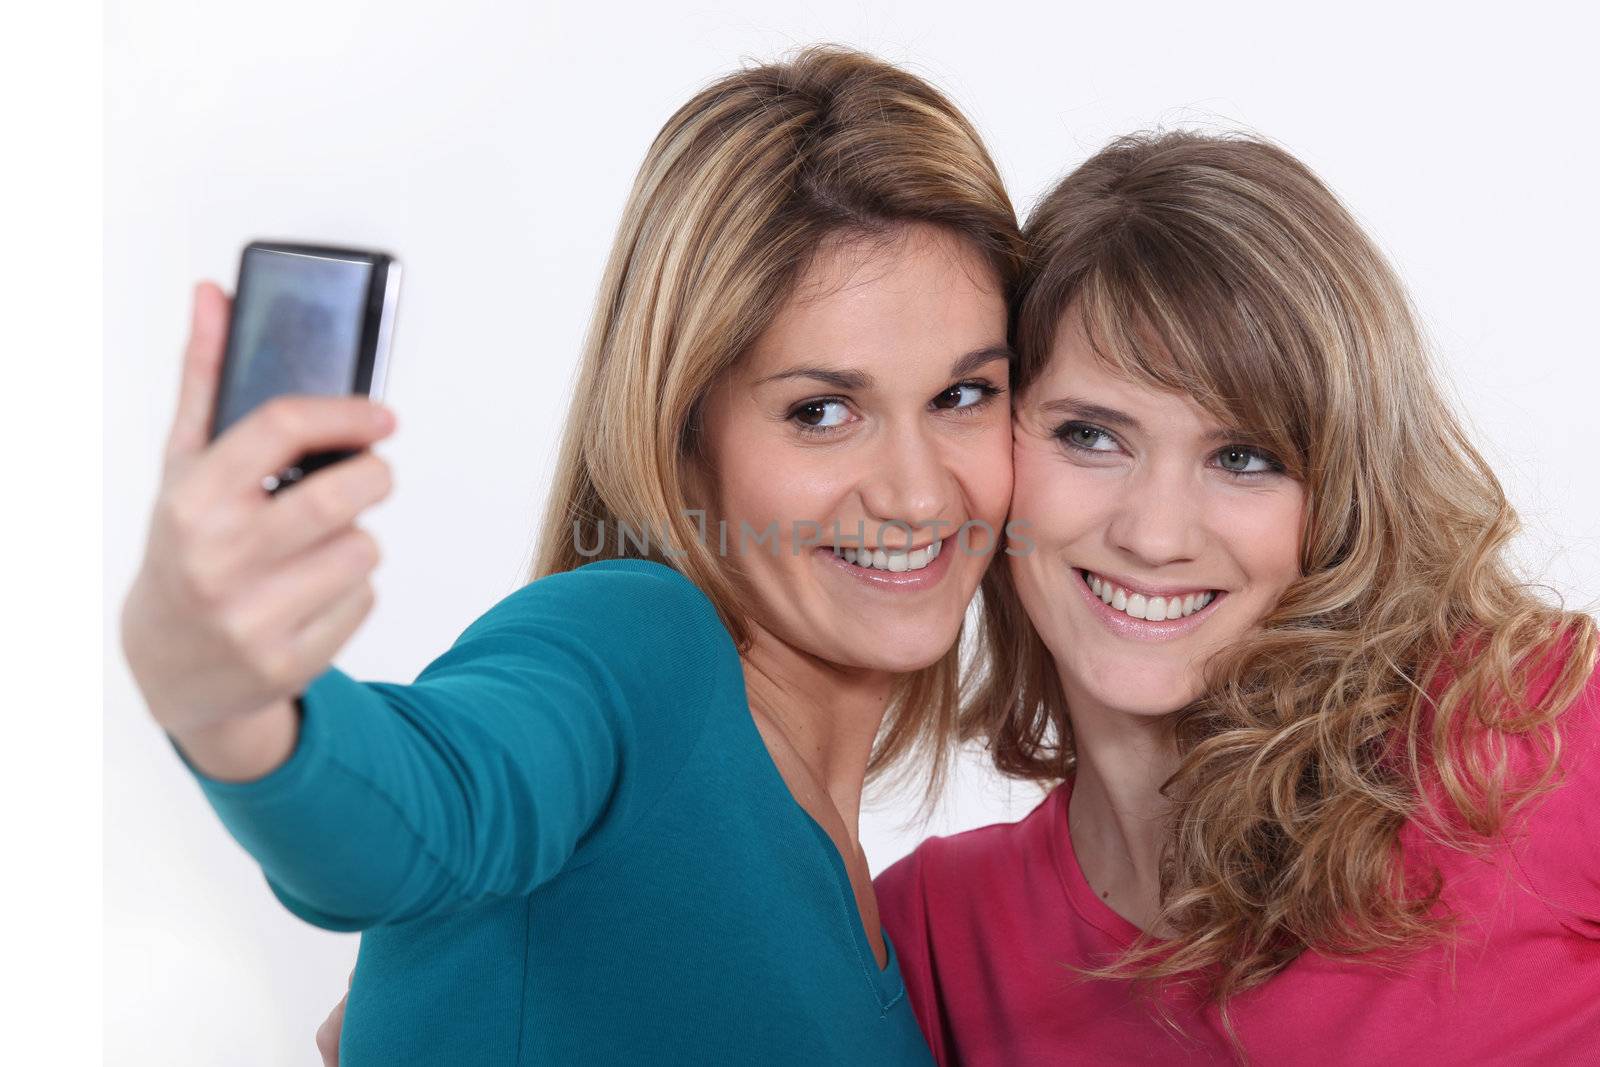 Two girls taking a picture by phovoir